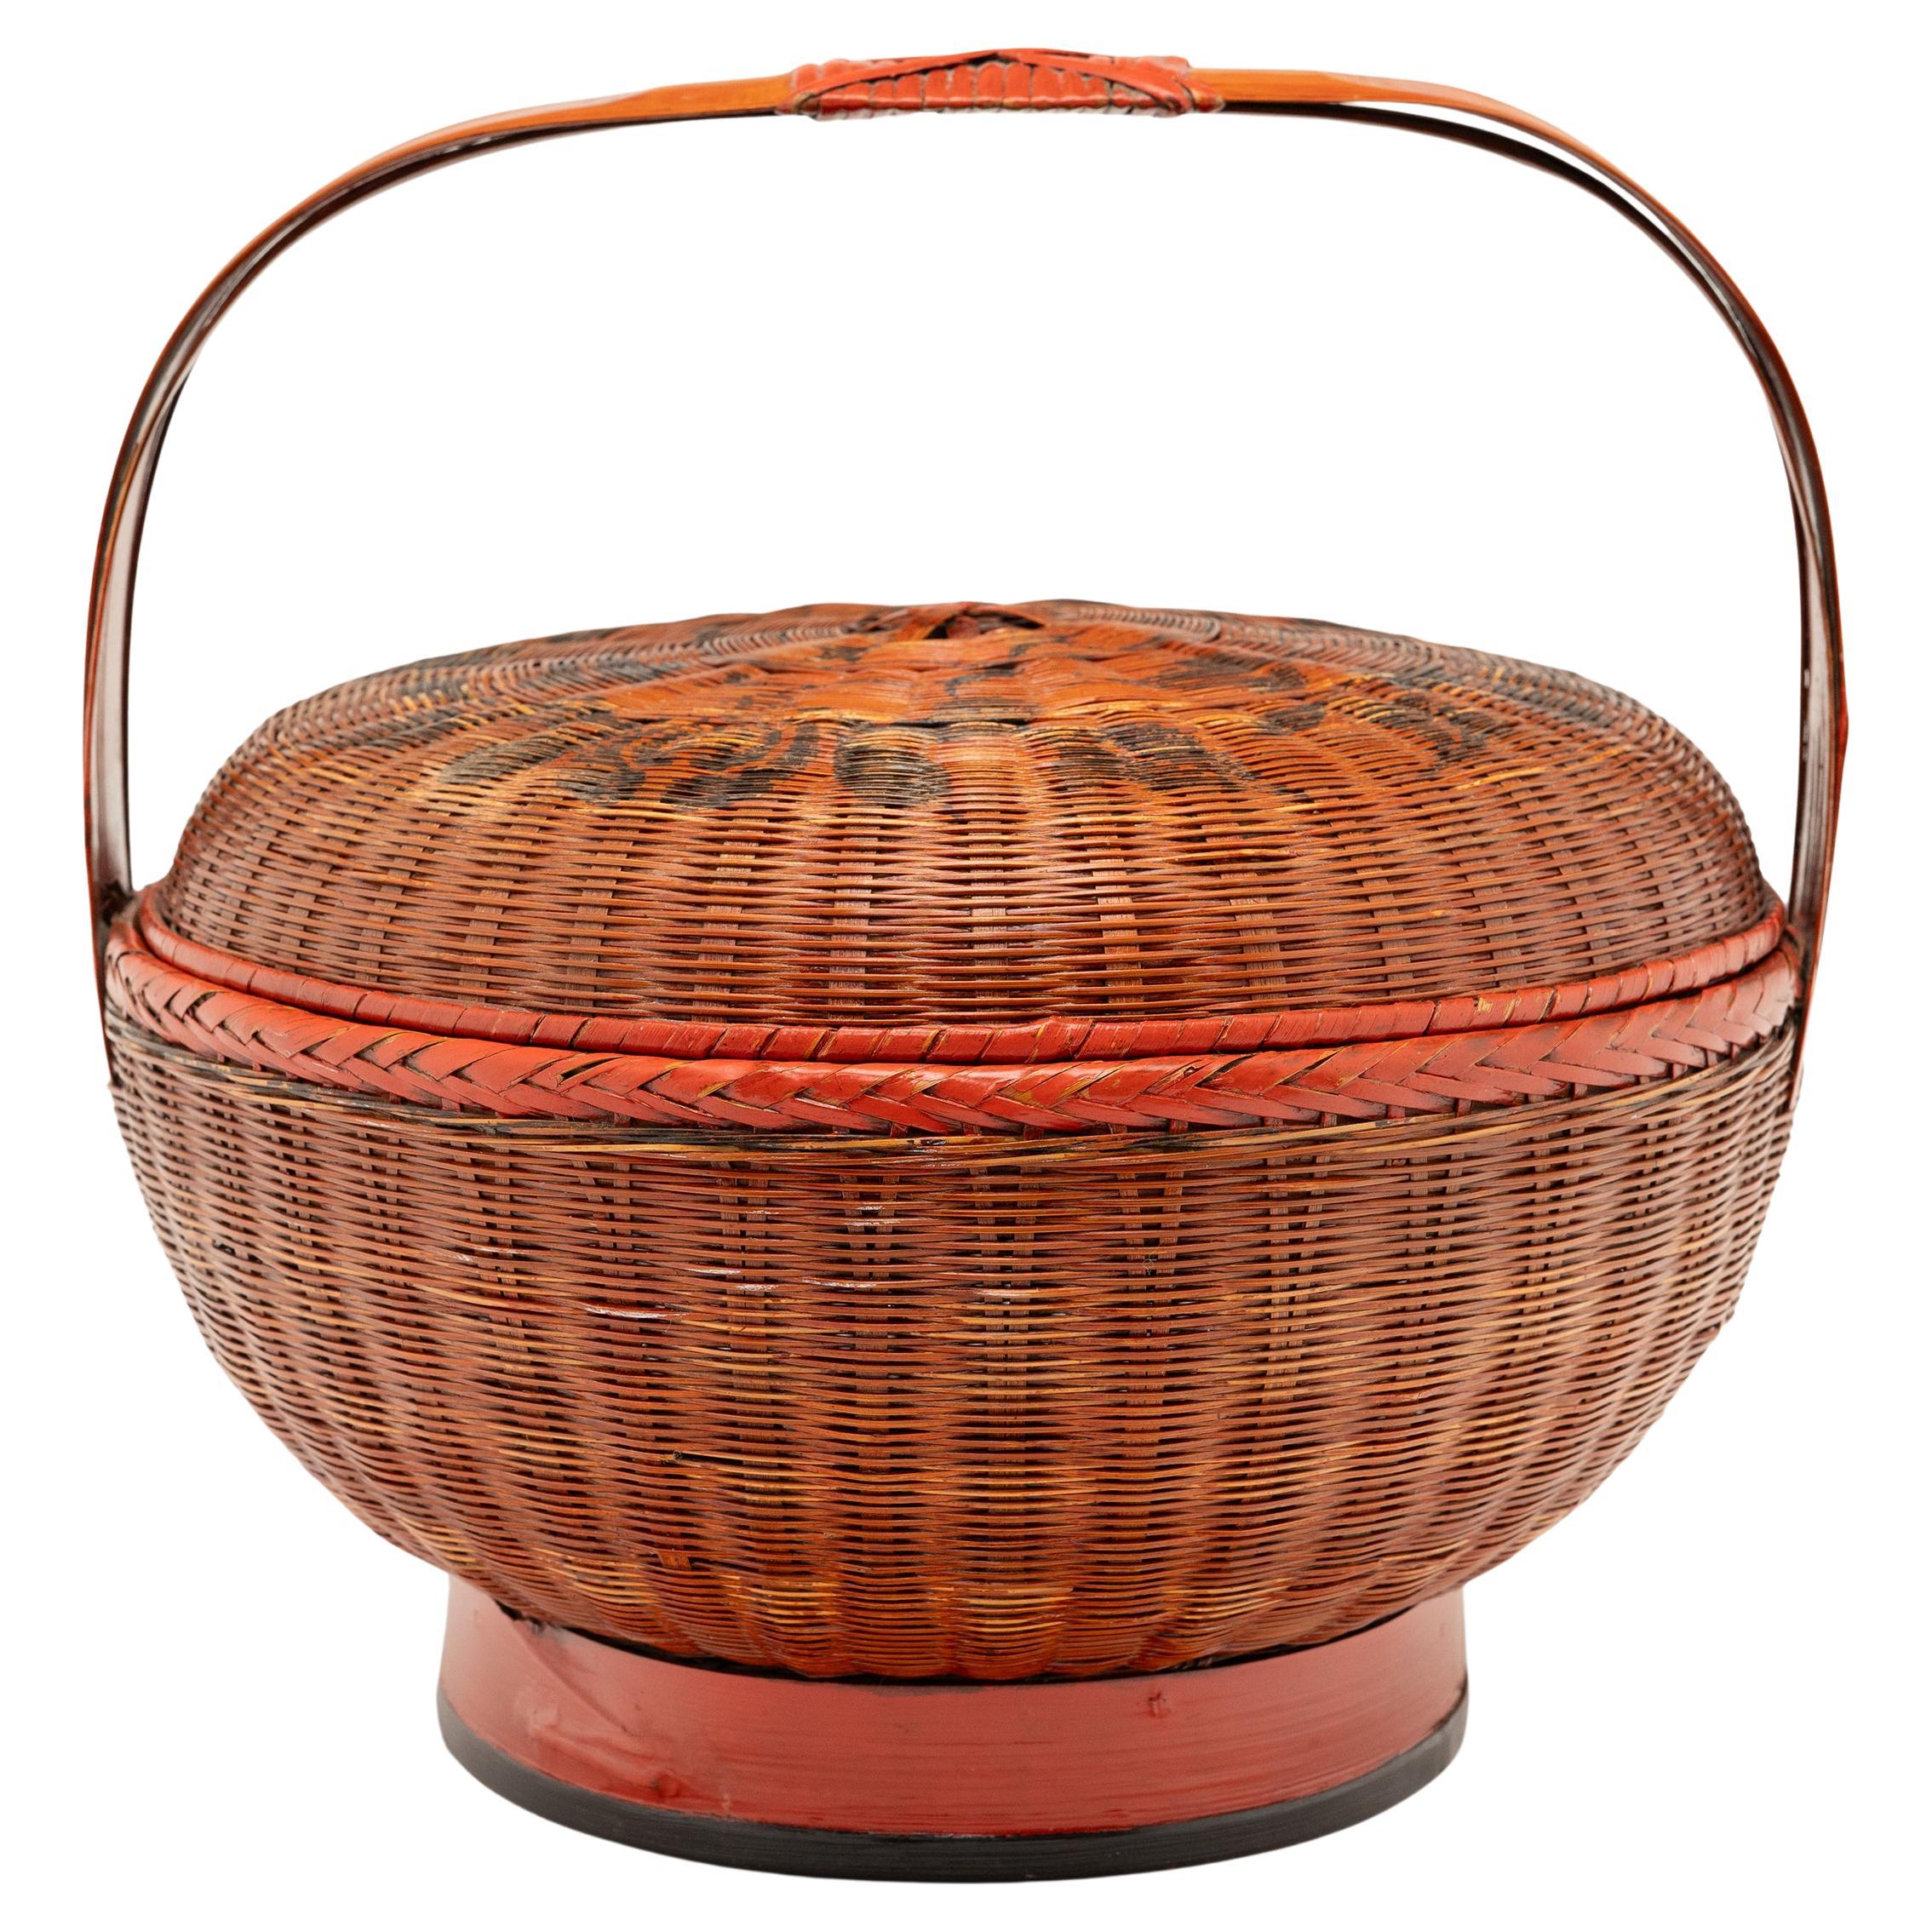 This lacquered Chinese carrying basket impresses with a prim, balanced form of intricately woven split bamboo. A celebratory form traditionally used for carrying food or delivering gifts, the lidded basket has a rounded body elevated by a footed